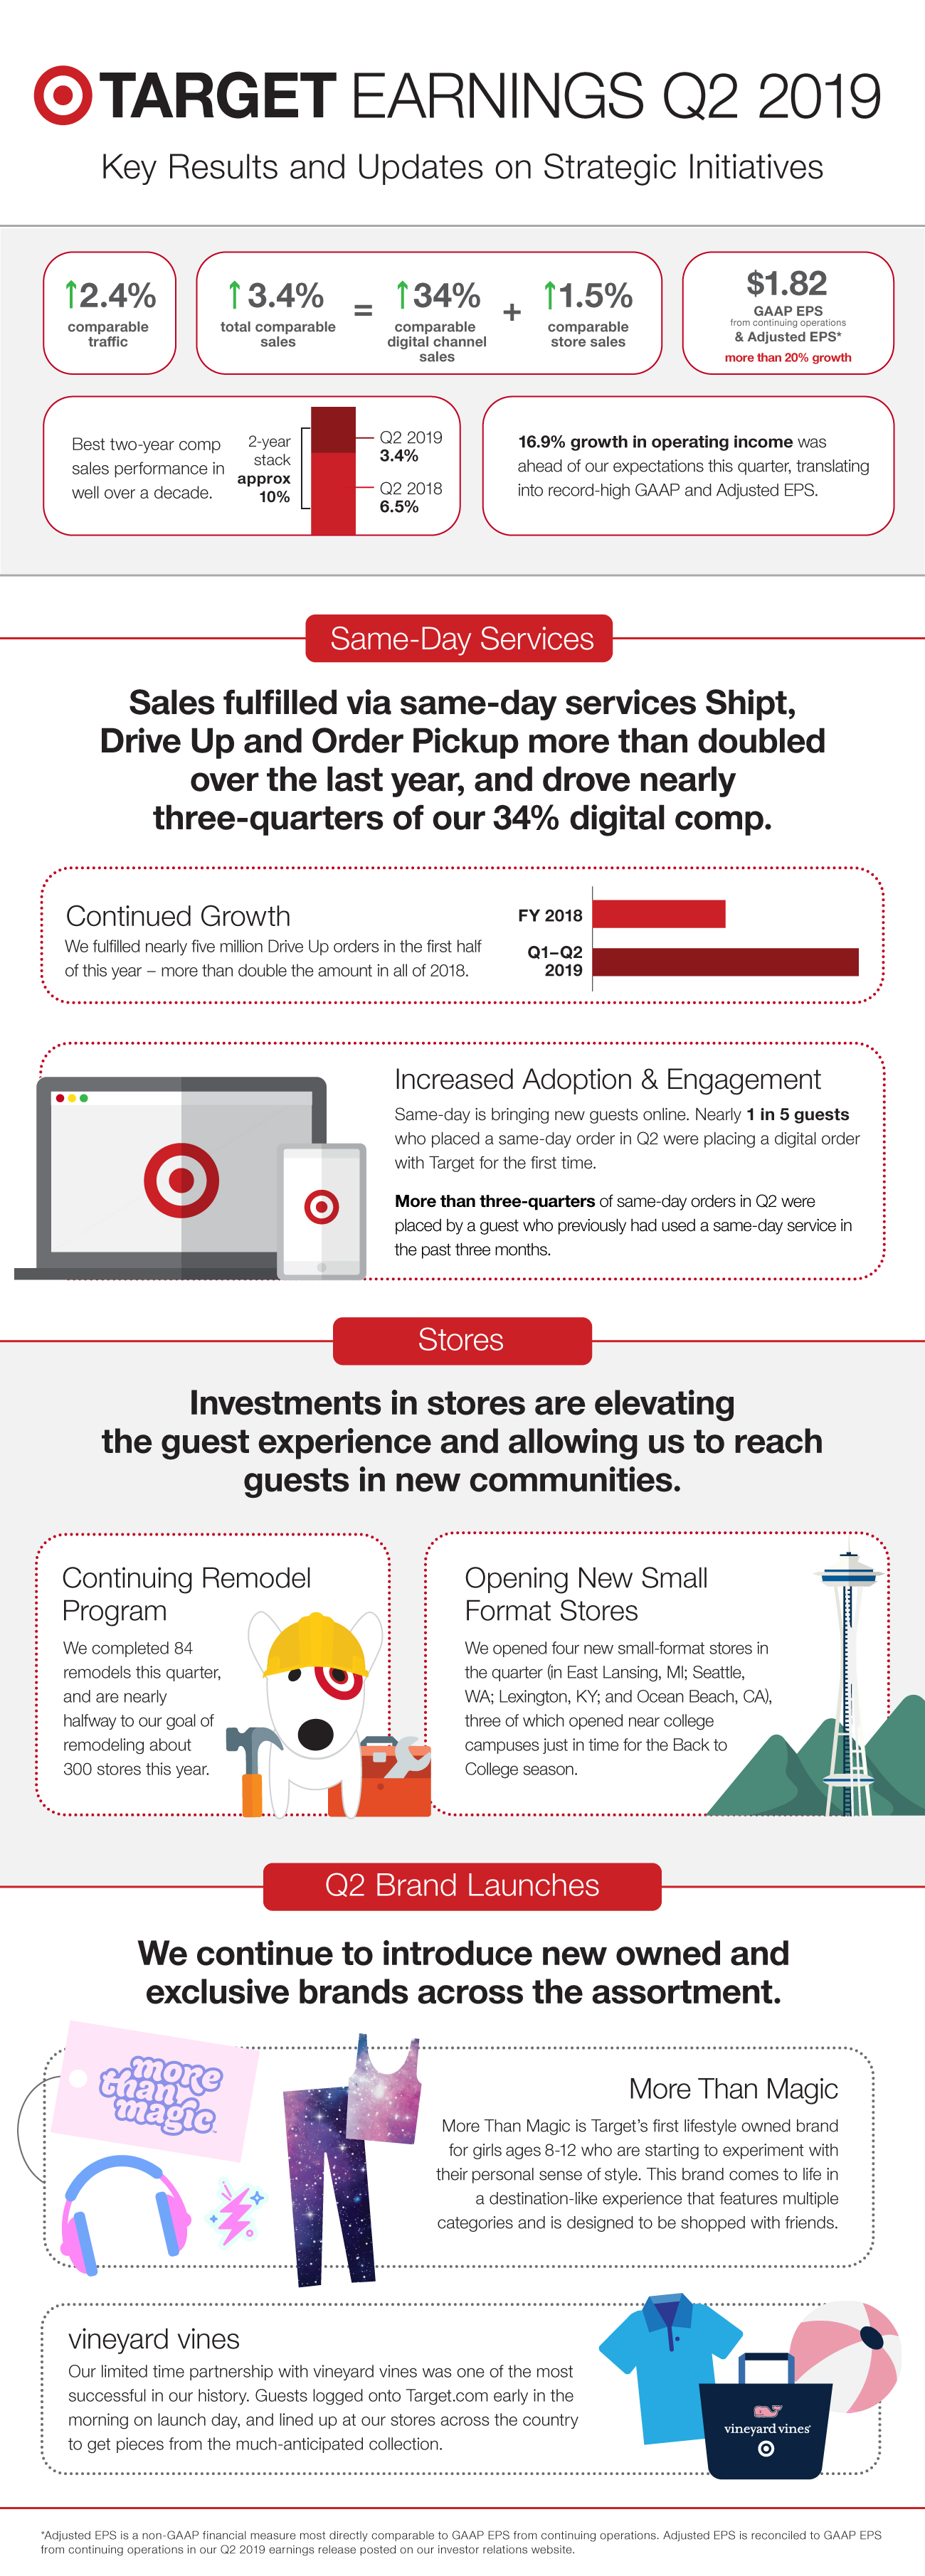 An infographic illustrating key Q2 results